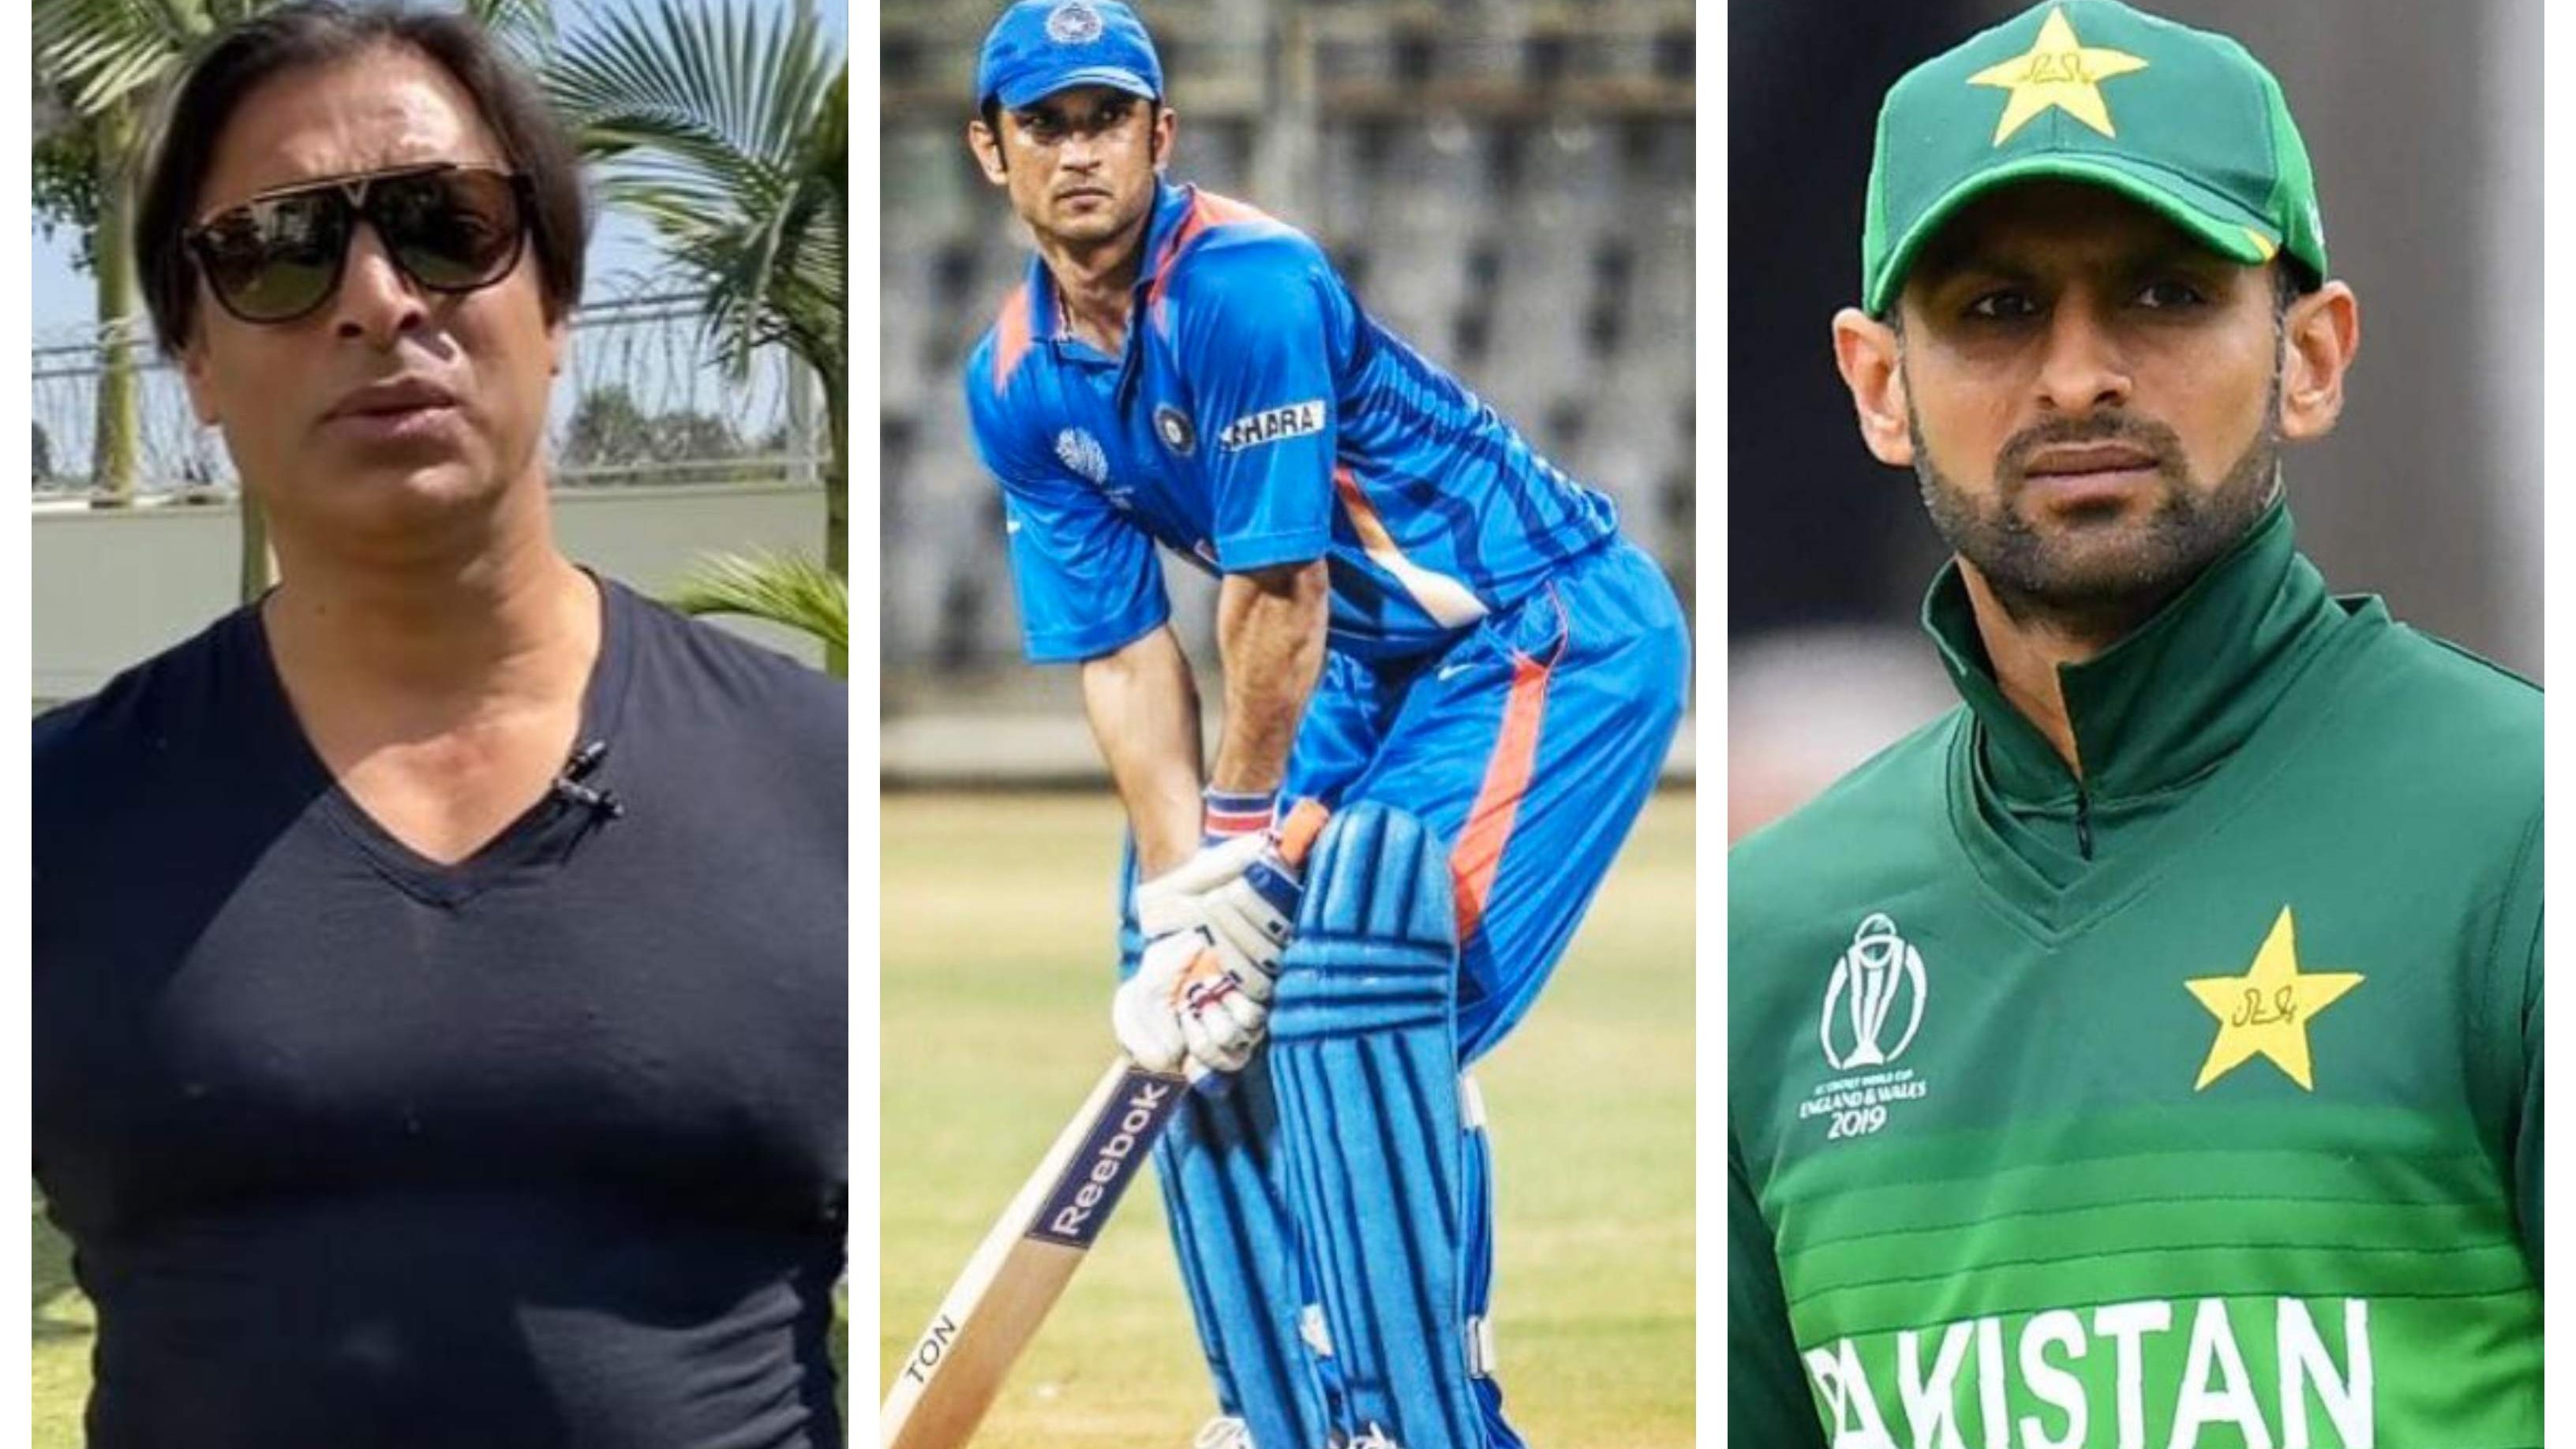 Pakistani cricketers react to the death of Bollywood actor Sushant Singh Rajput